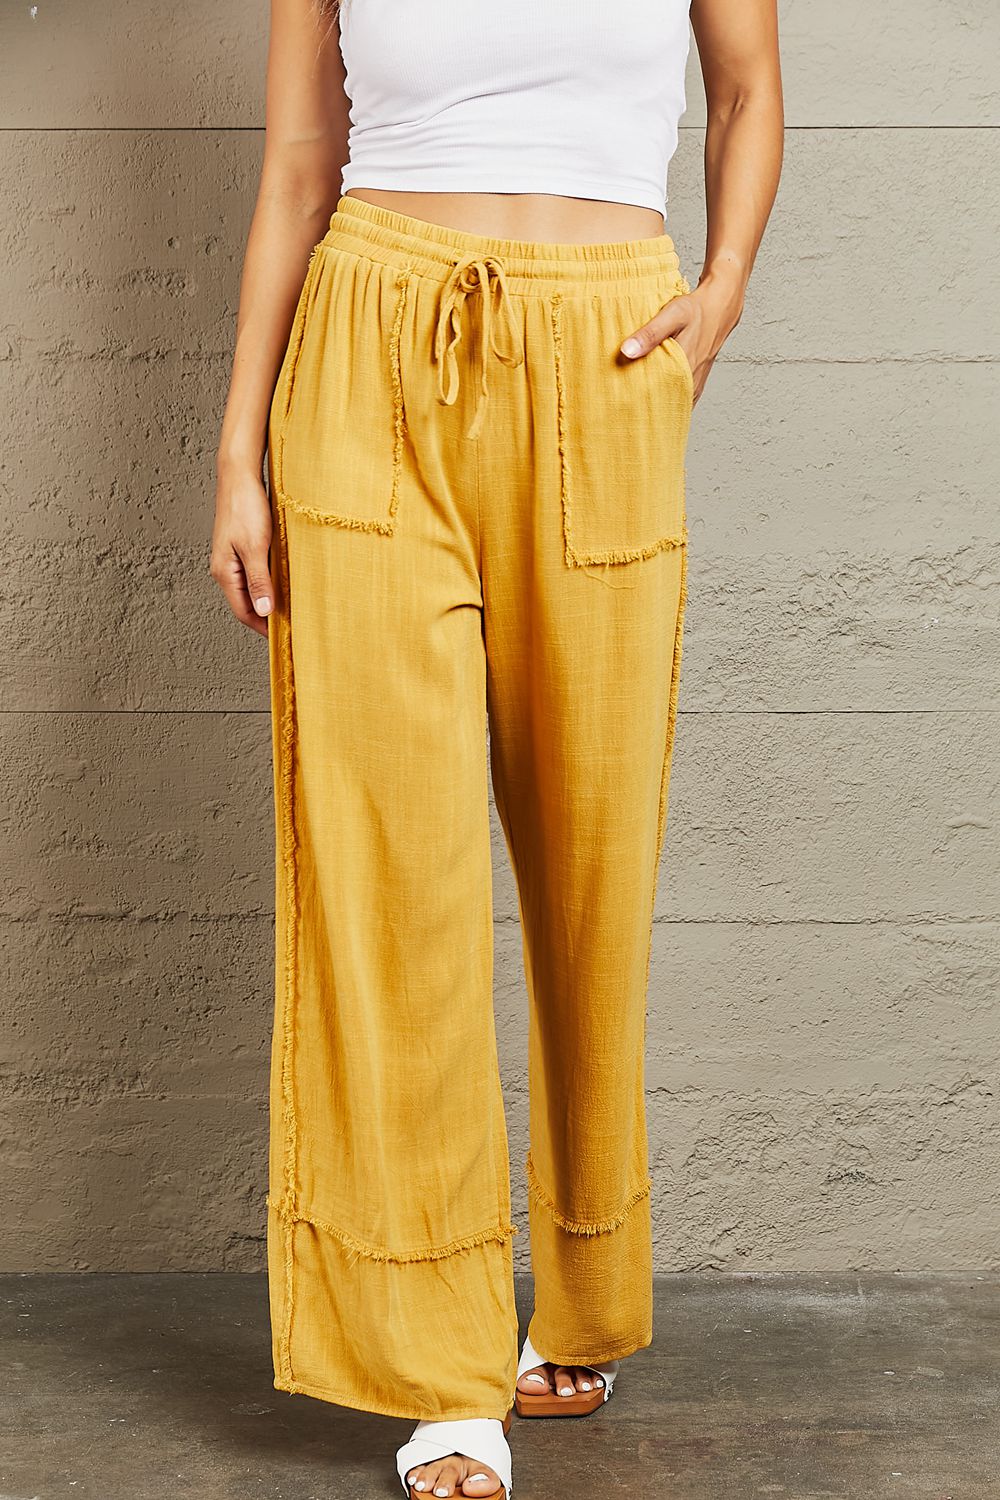 Love Me Full Size Mineral Wash Wide Leg Pants - Yellow / S - Bottoms - Pants - 1 - 2024